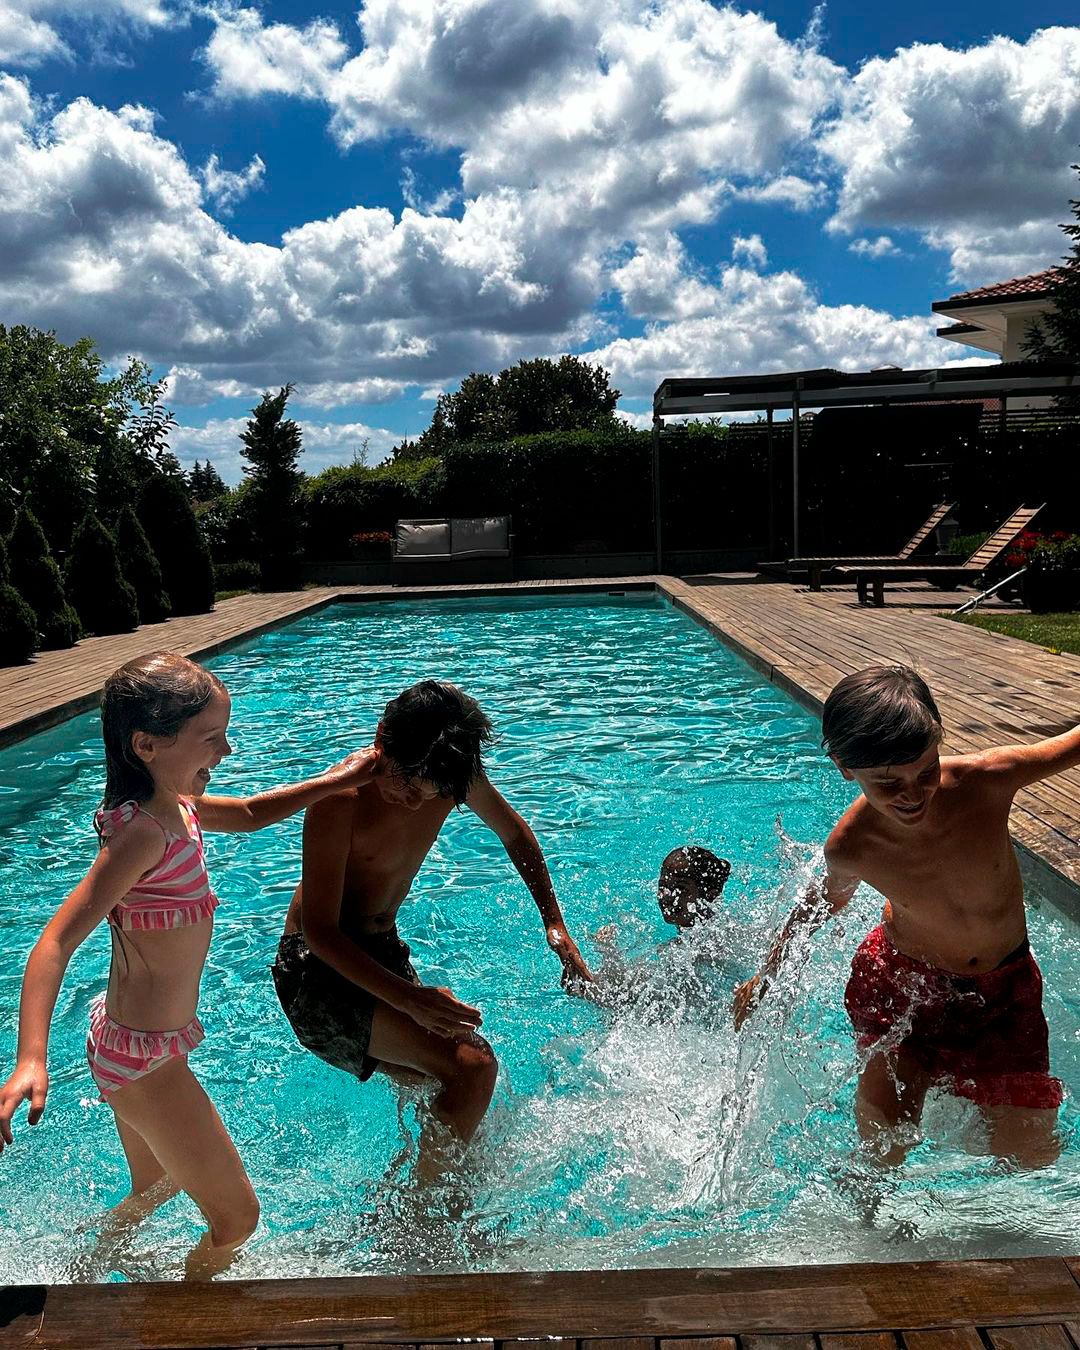 Pool day for the López-Icardi brothers (Photos: Instagram)